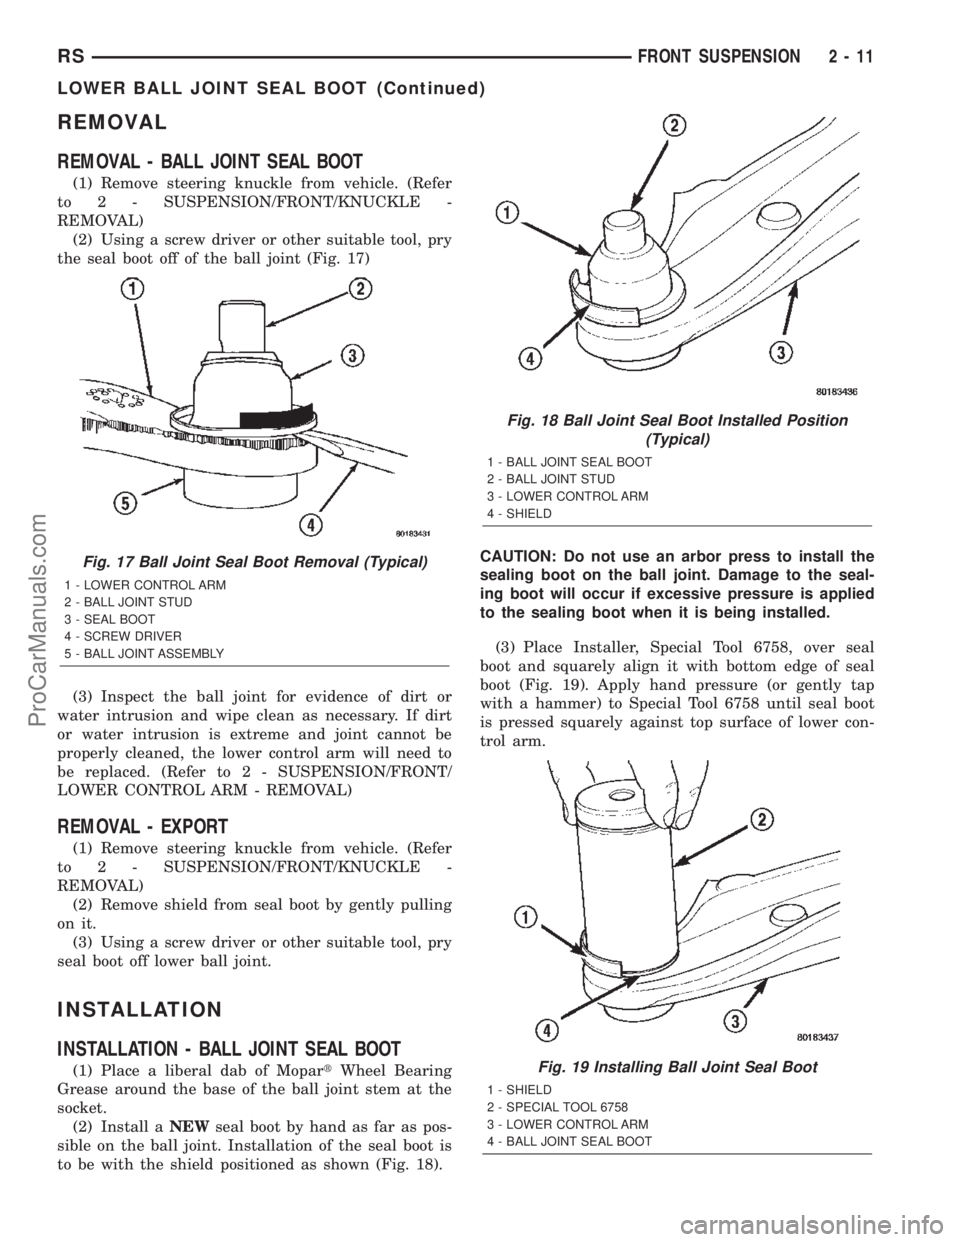 DODGE TOWN AND COUNTRY 2002 Owners Guide REMOVAL
REMOVAL - BALL JOINT SEAL BOOT
(1) Remove steering knuckle from vehicle. (Refer
to 2 - SUSPENSION/FRONT/KNUCKLE -
REMOVAL)
(2) Using a screw driver or other suitable tool, pry
the seal boot of